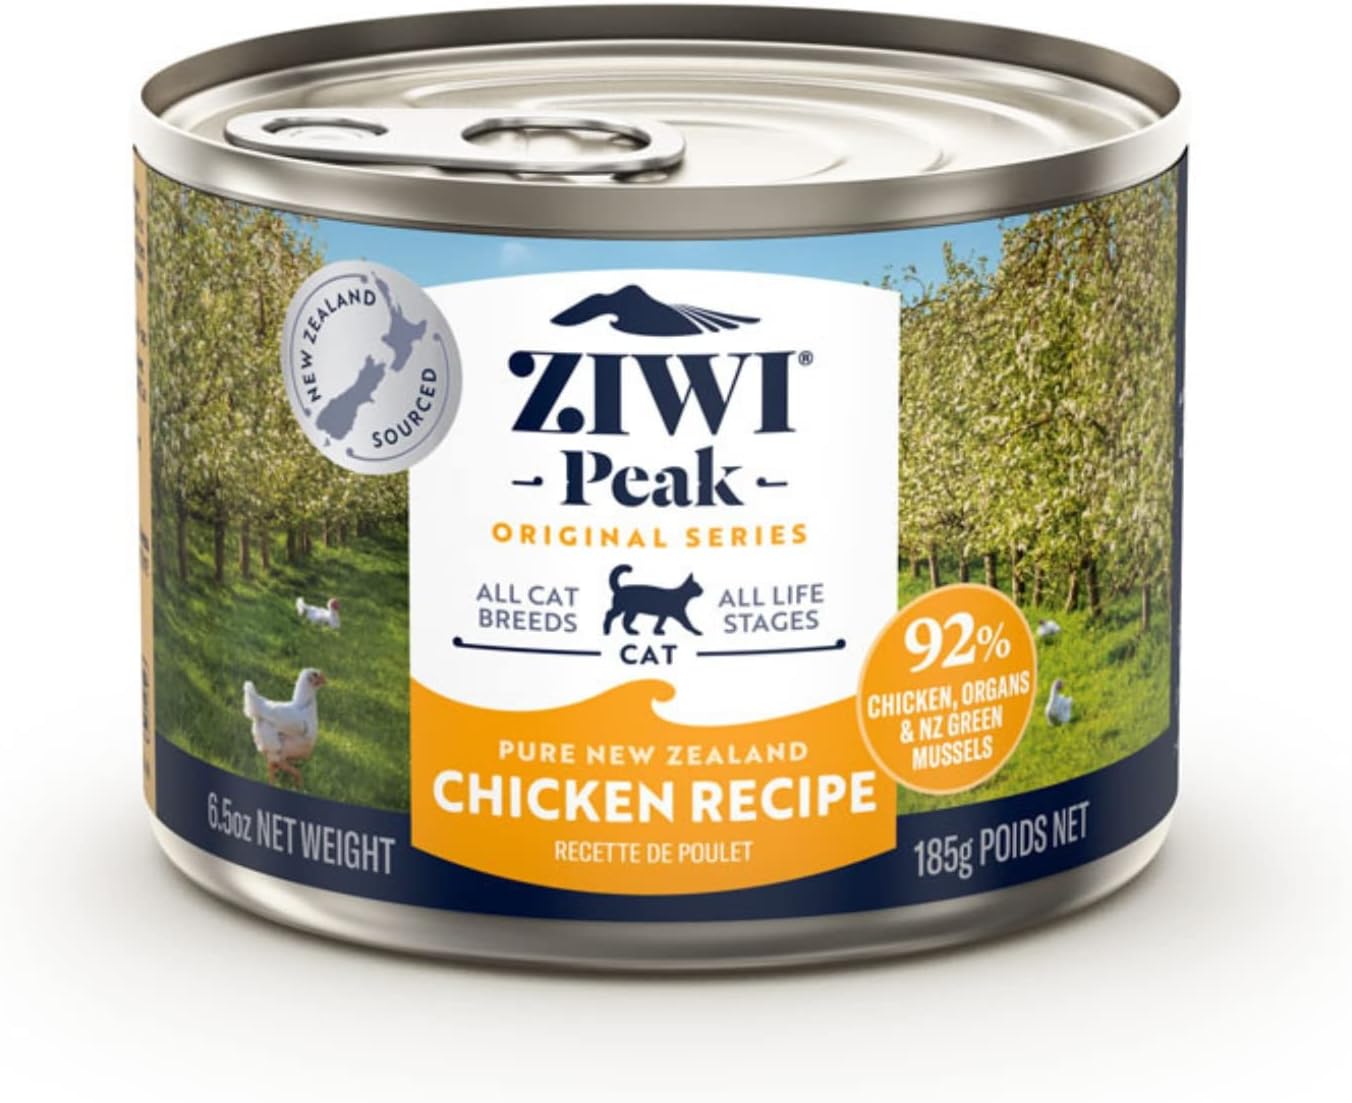 12-Pack 6.5-Oz Ziwi Peak Canned Wet Cat Food (Beef, Chicken, Mackerel, Lamb) $21.77 ($1.81 each) w/ S&S + Free Shipping w/ Prime or on $35+